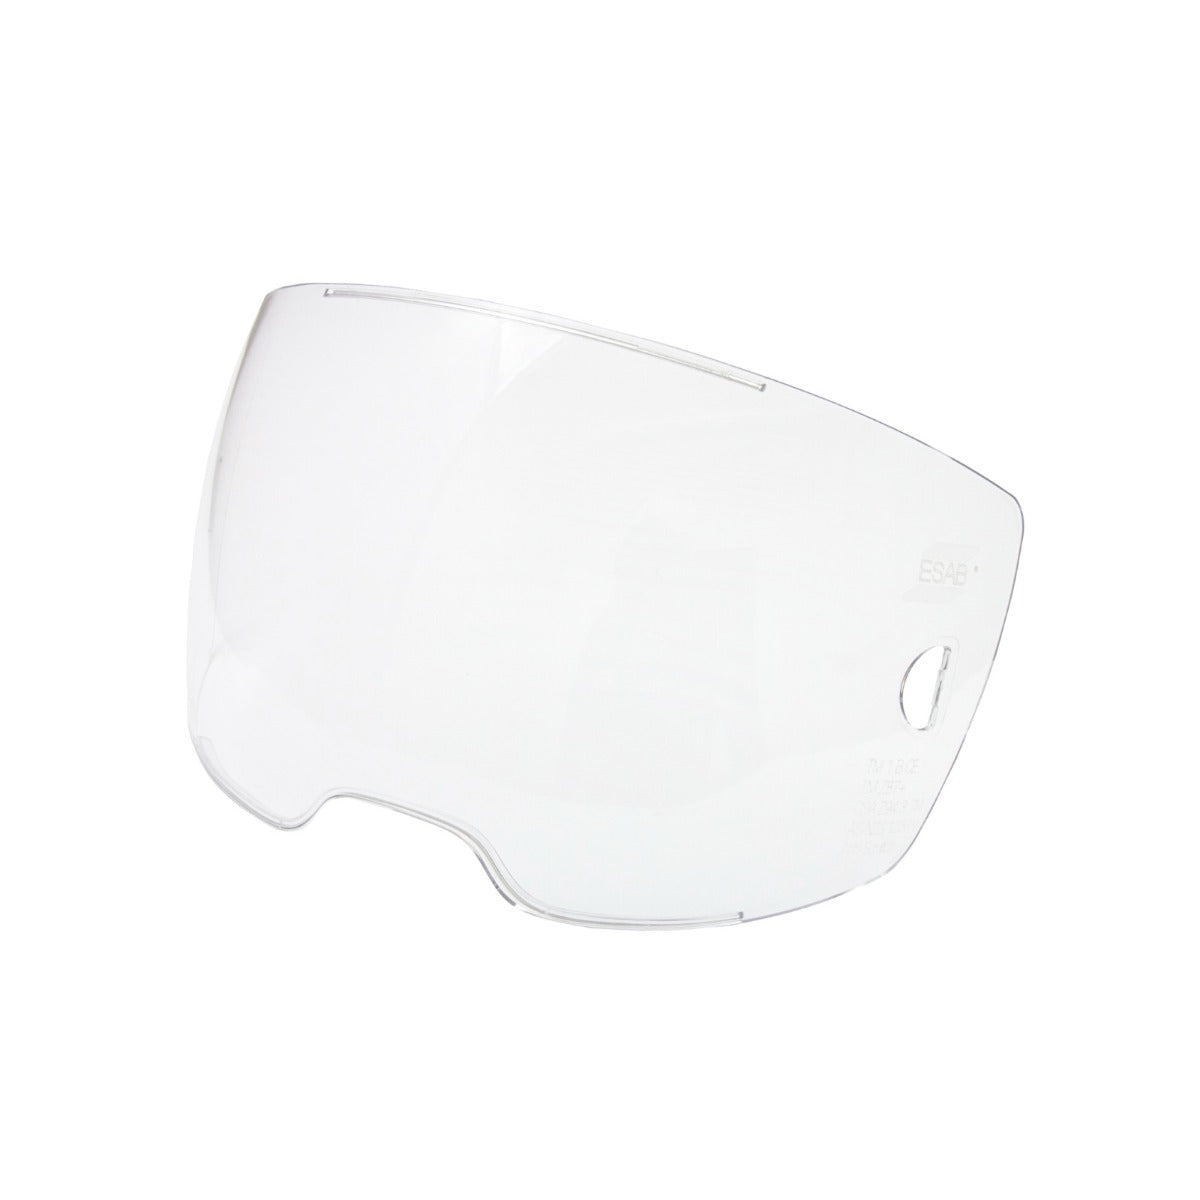 ESAB Sentinel A60 Clear Outside Cover Lens - Pkg of 2 (0700600880)